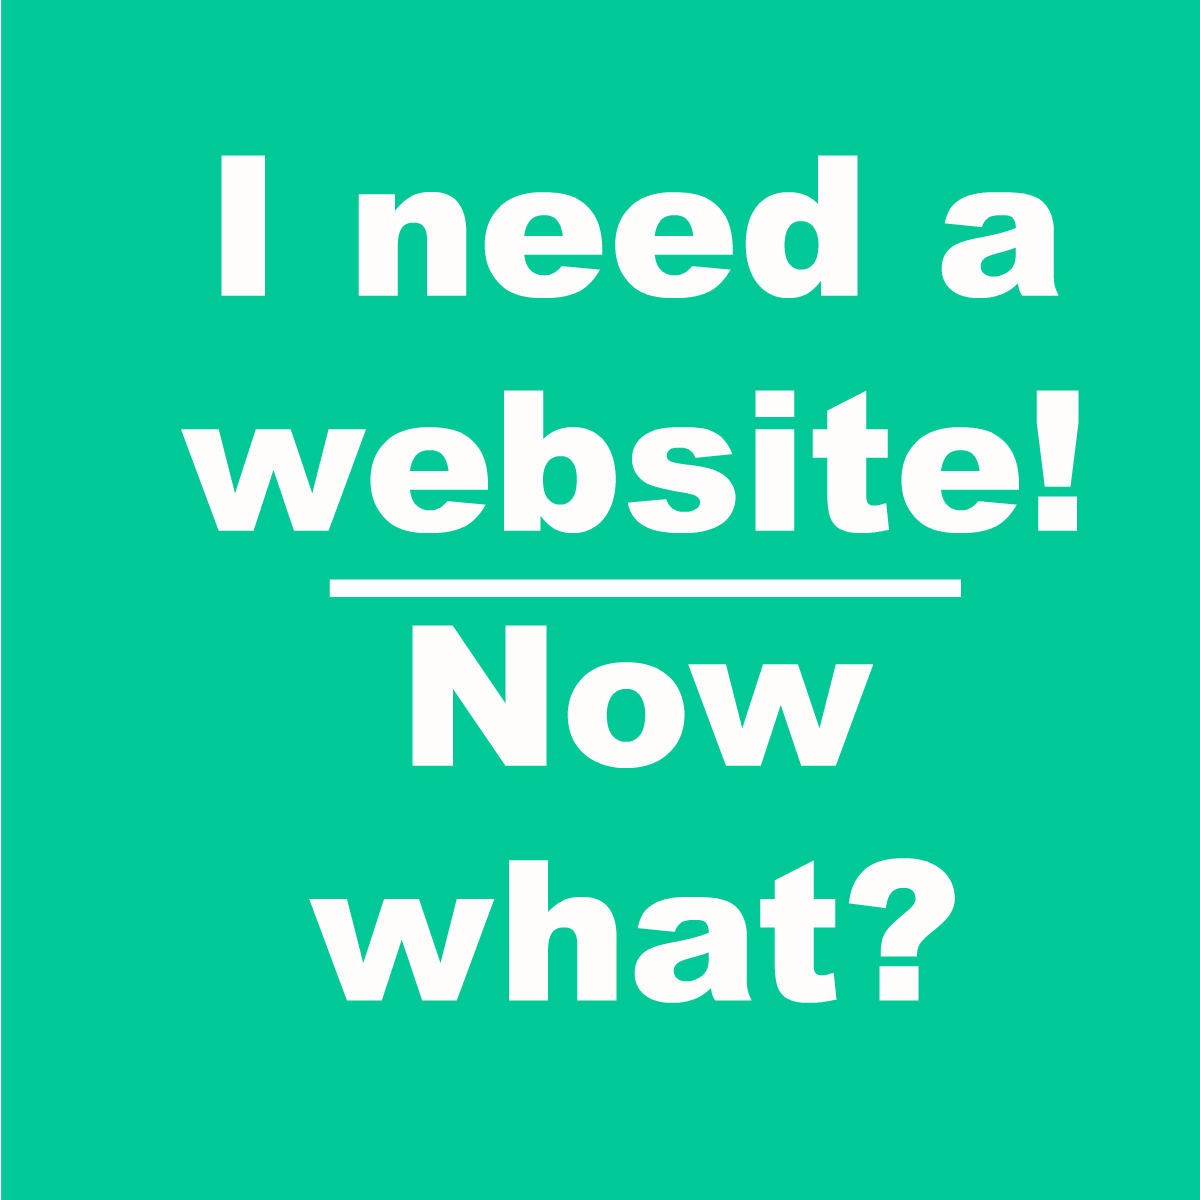 I need a website!  Now what?